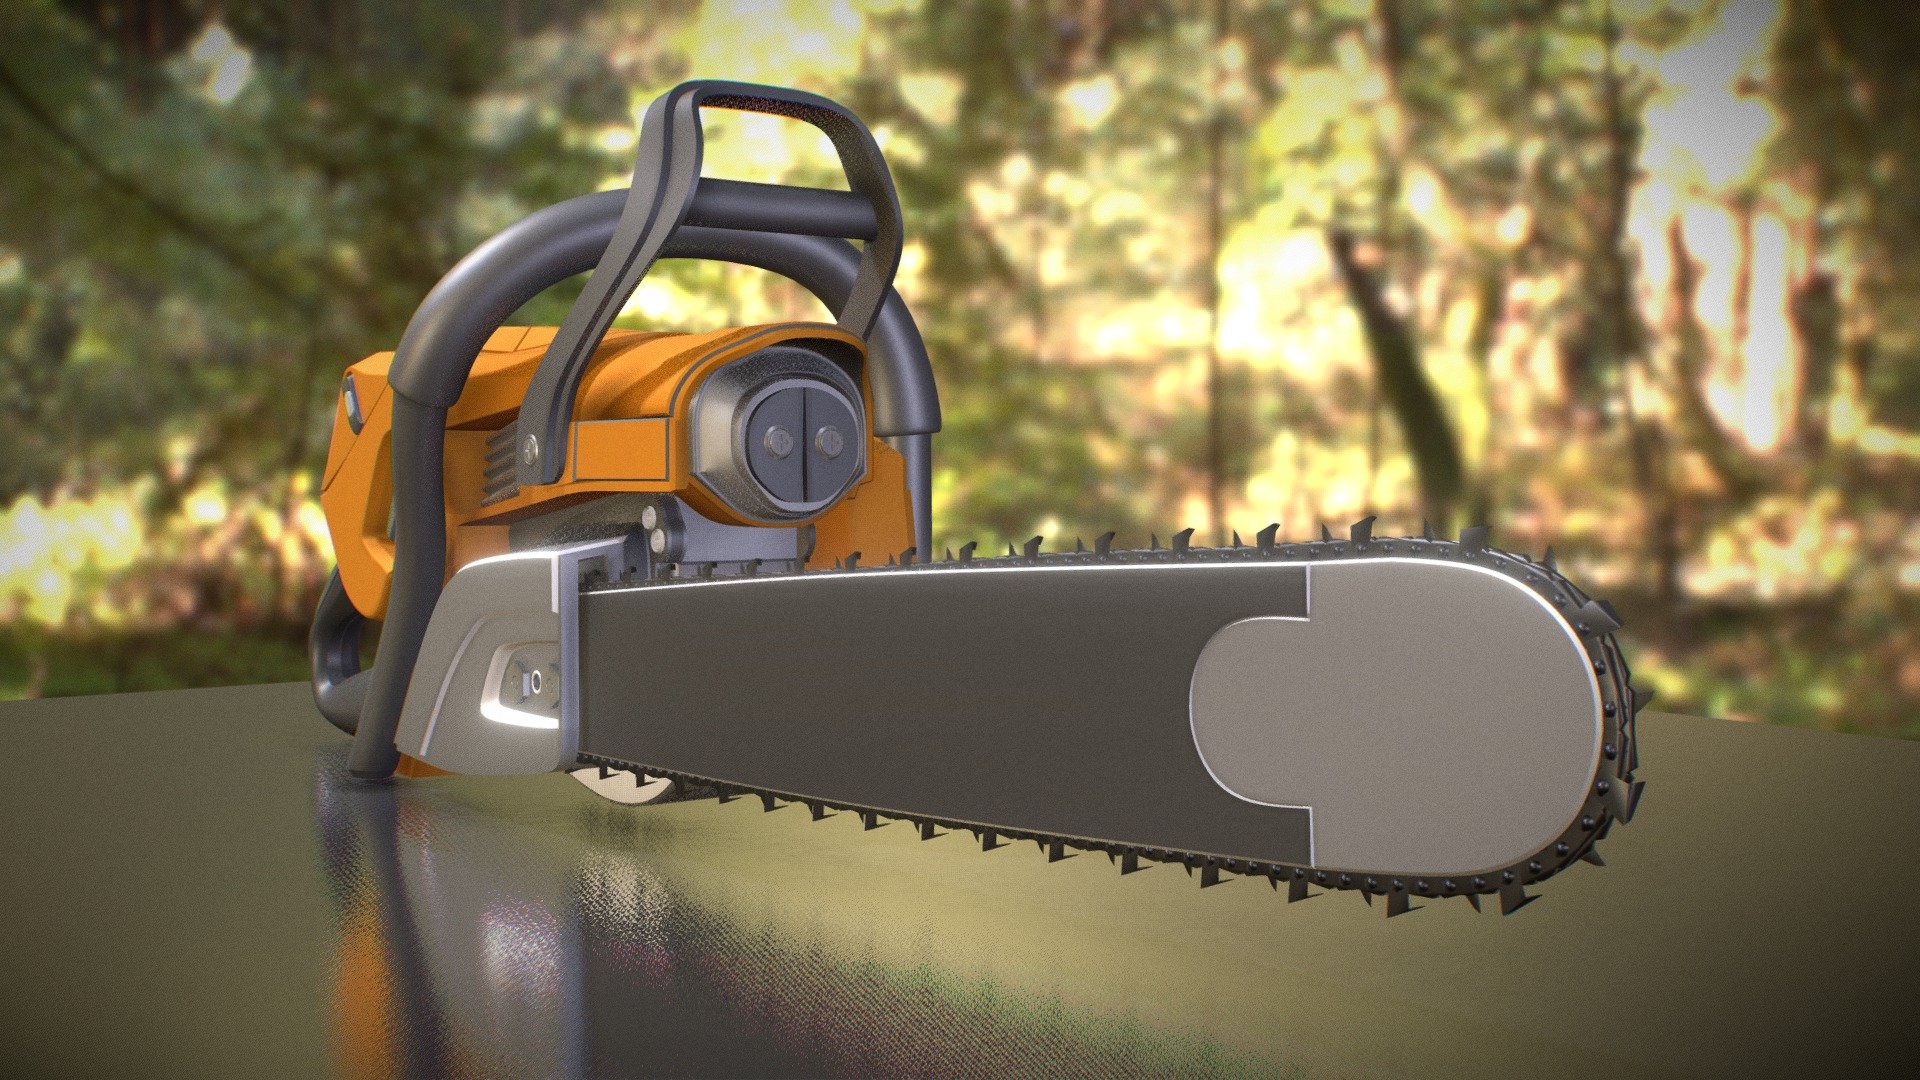 Here is the high-poly model of my chainsaw.

I modeled this tool in Blender 20.01.2014. 

Chainsaw (Timelapse Video)





More details




Animated No

Rigged No

VR / AR / Low-poly No

Geometry Subdivision ready

Polygons 17,570

Vertices 42,714

Textures No

Materials Yes

UV Mapping No



Available formats




Blender (.blend)(2 files)

Alias/WaveFront Material (.mtl)

Autodesk FBX (.fbx) 7.24 MB

Collada (.dae) 18 MB

OBJ (.obj) 21.6 MB

DXF (.dxf) 46.9 MB

 - Chainsaw High-Poly with Animation - Buy Royalty Free 3D model by 3DHaupt (@dennish2010) 3d model